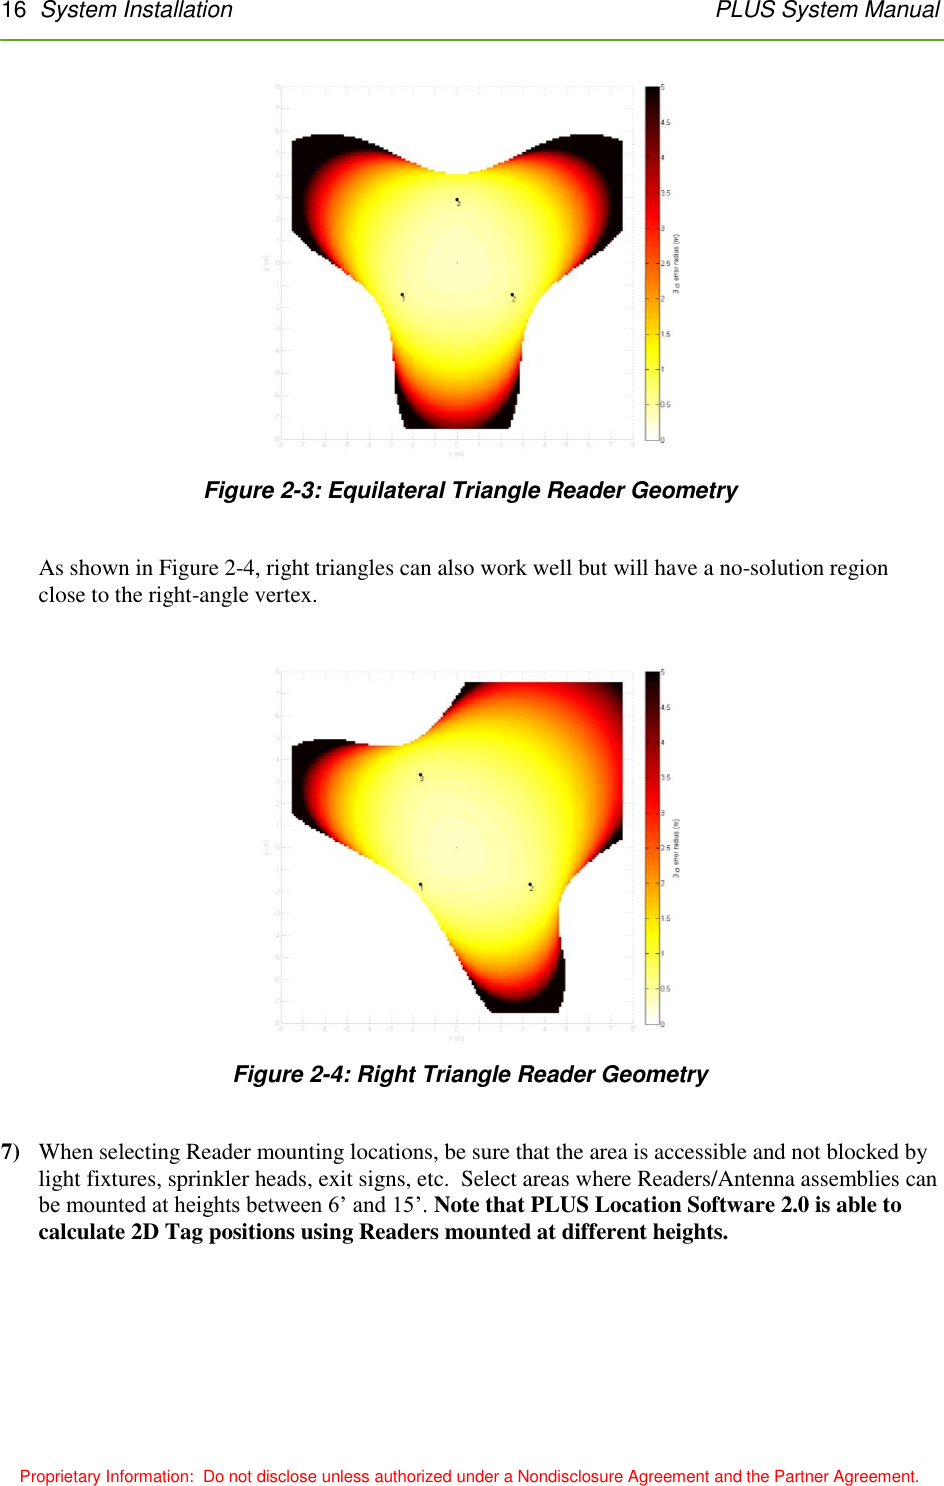 16  System Installation   PLUS System Manual  Proprietary Information:  Do not disclose unless authorized under a Nondisclosure Agreement and the Partner Agreement.  Figure 2-3: Equilateral Triangle Reader Geometry  As shown in Figure 2-4, right triangles can also work well but will have a no-solution region close to the right-angle vertex.   Figure 2-4: Right Triangle Reader Geometry  7) When selecting Reader mounting locations, be sure that the area is accessible and not blocked by light fixtures, sprinkler heads, exit signs, etc.  Select areas where Readers/Antenna assemblies can be mounted at heights between 6’ and 15’. Note that PLUS Location Software 2.0 is able to calculate 2D Tag positions using Readers mounted at different heights.  